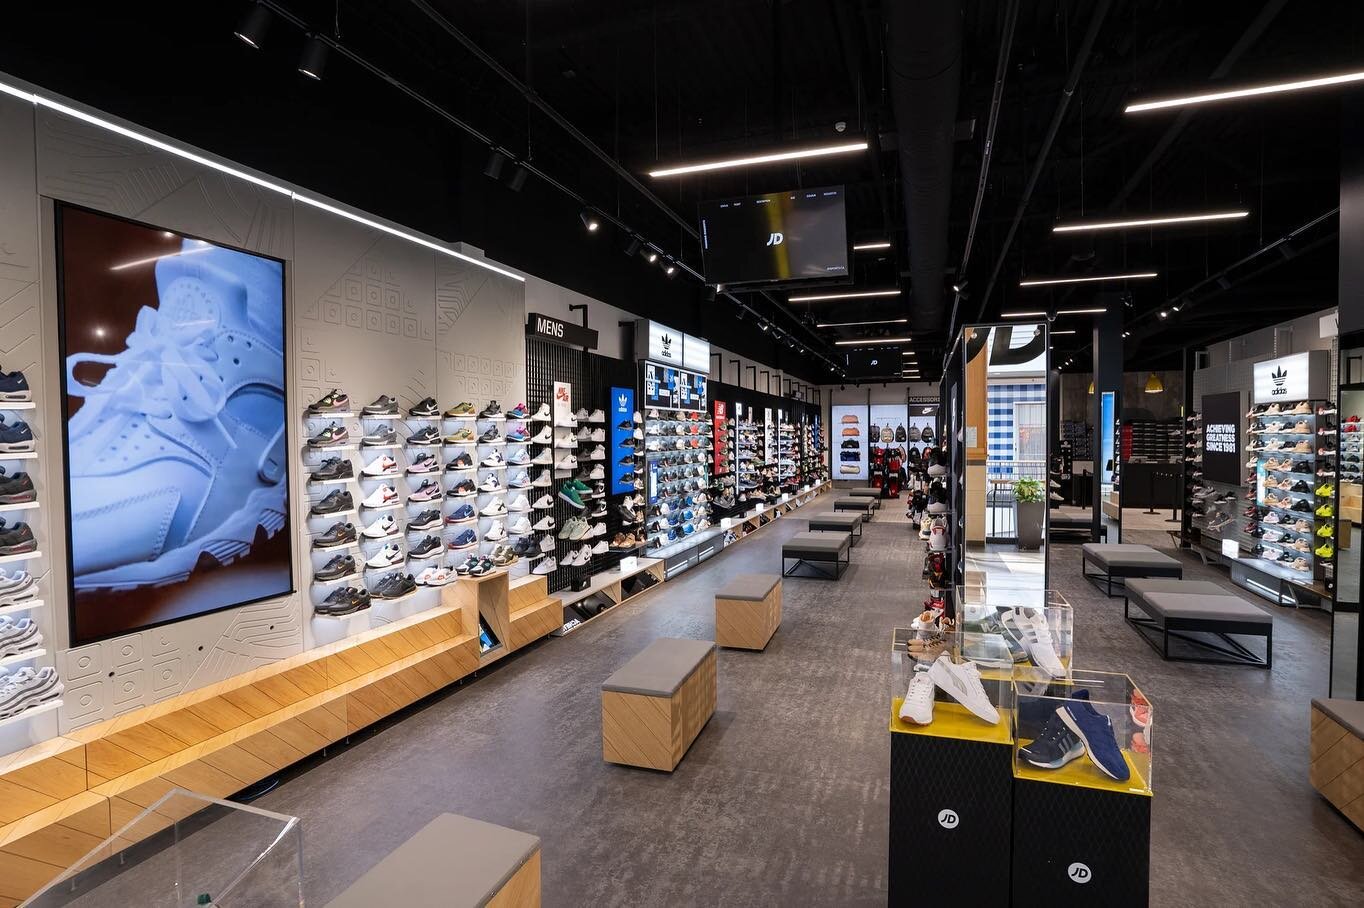 Check out the JD Sports we recently completed in the Heartland Town Centre❗️

We completed the entire interior painting scope within this store including the deck ceilings❗️
&bull;
&bull;
&bull;
&bull; #jdsports #paint #painters #construction #interi